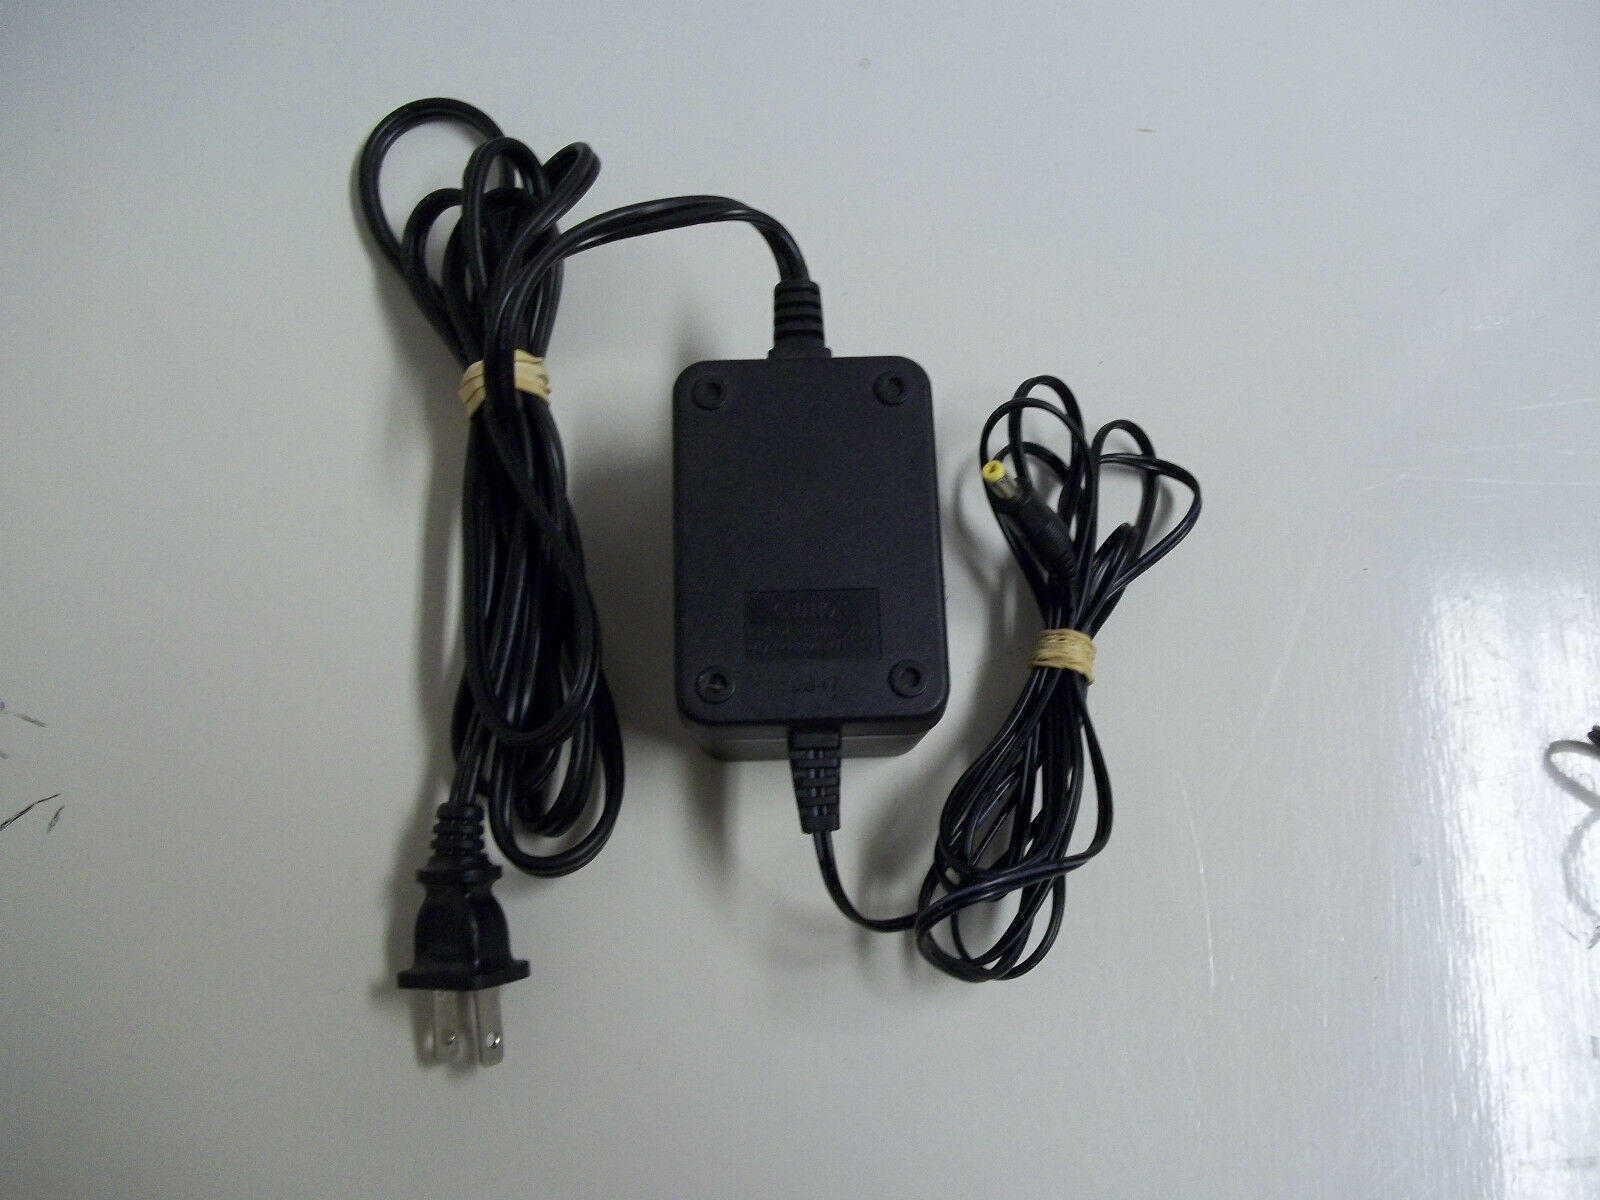 New AD-48151000D 15V DC 1000mA Power Adapter - Click Image to Close